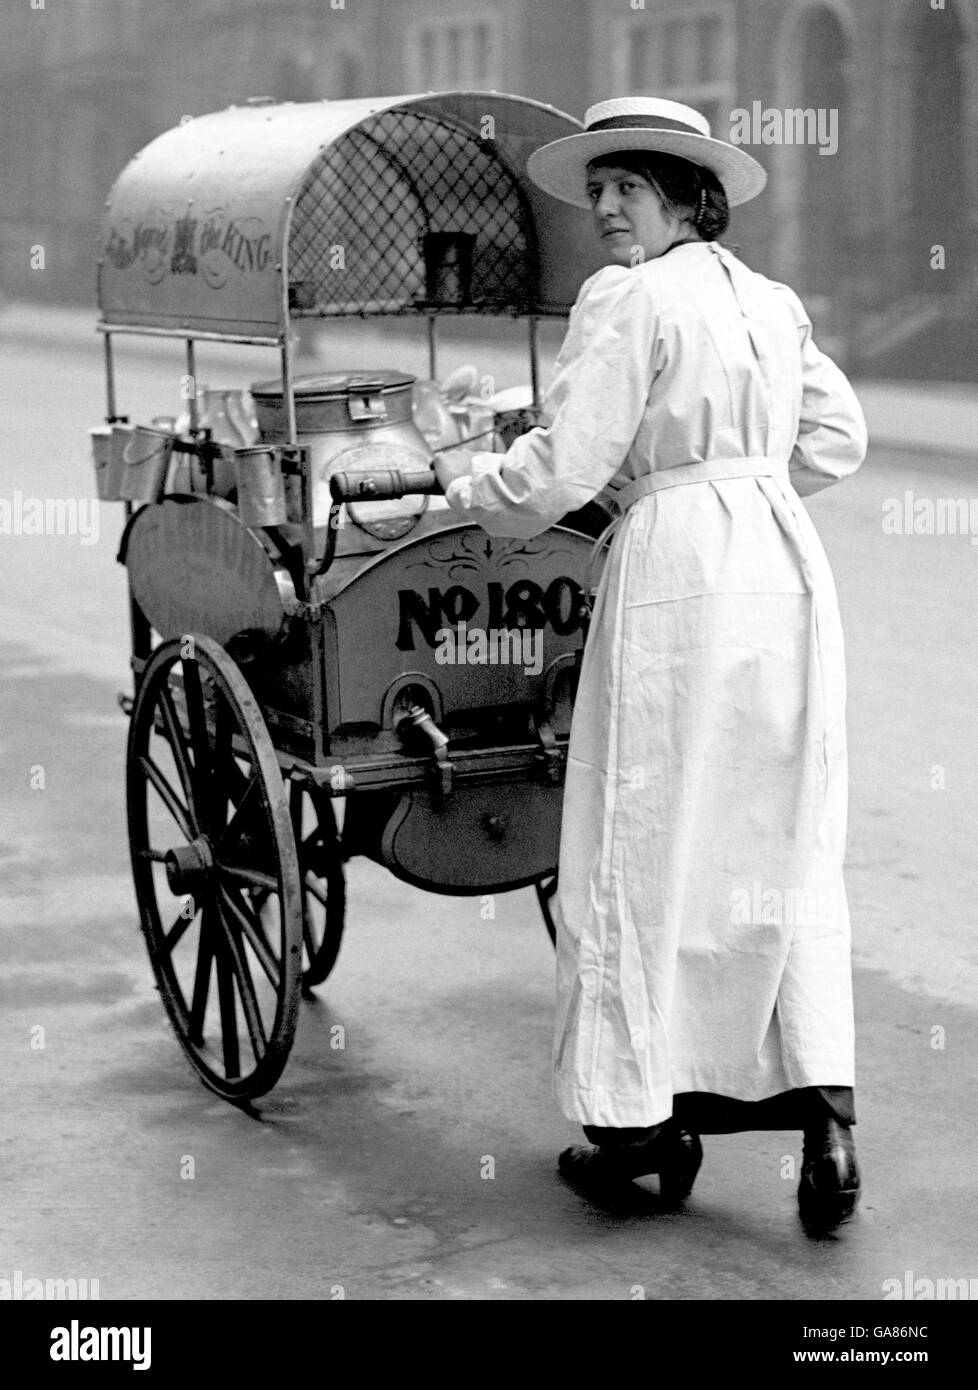 World War One - British Empire - The Home Front - Women at Work - London - 1916 Stock Photo